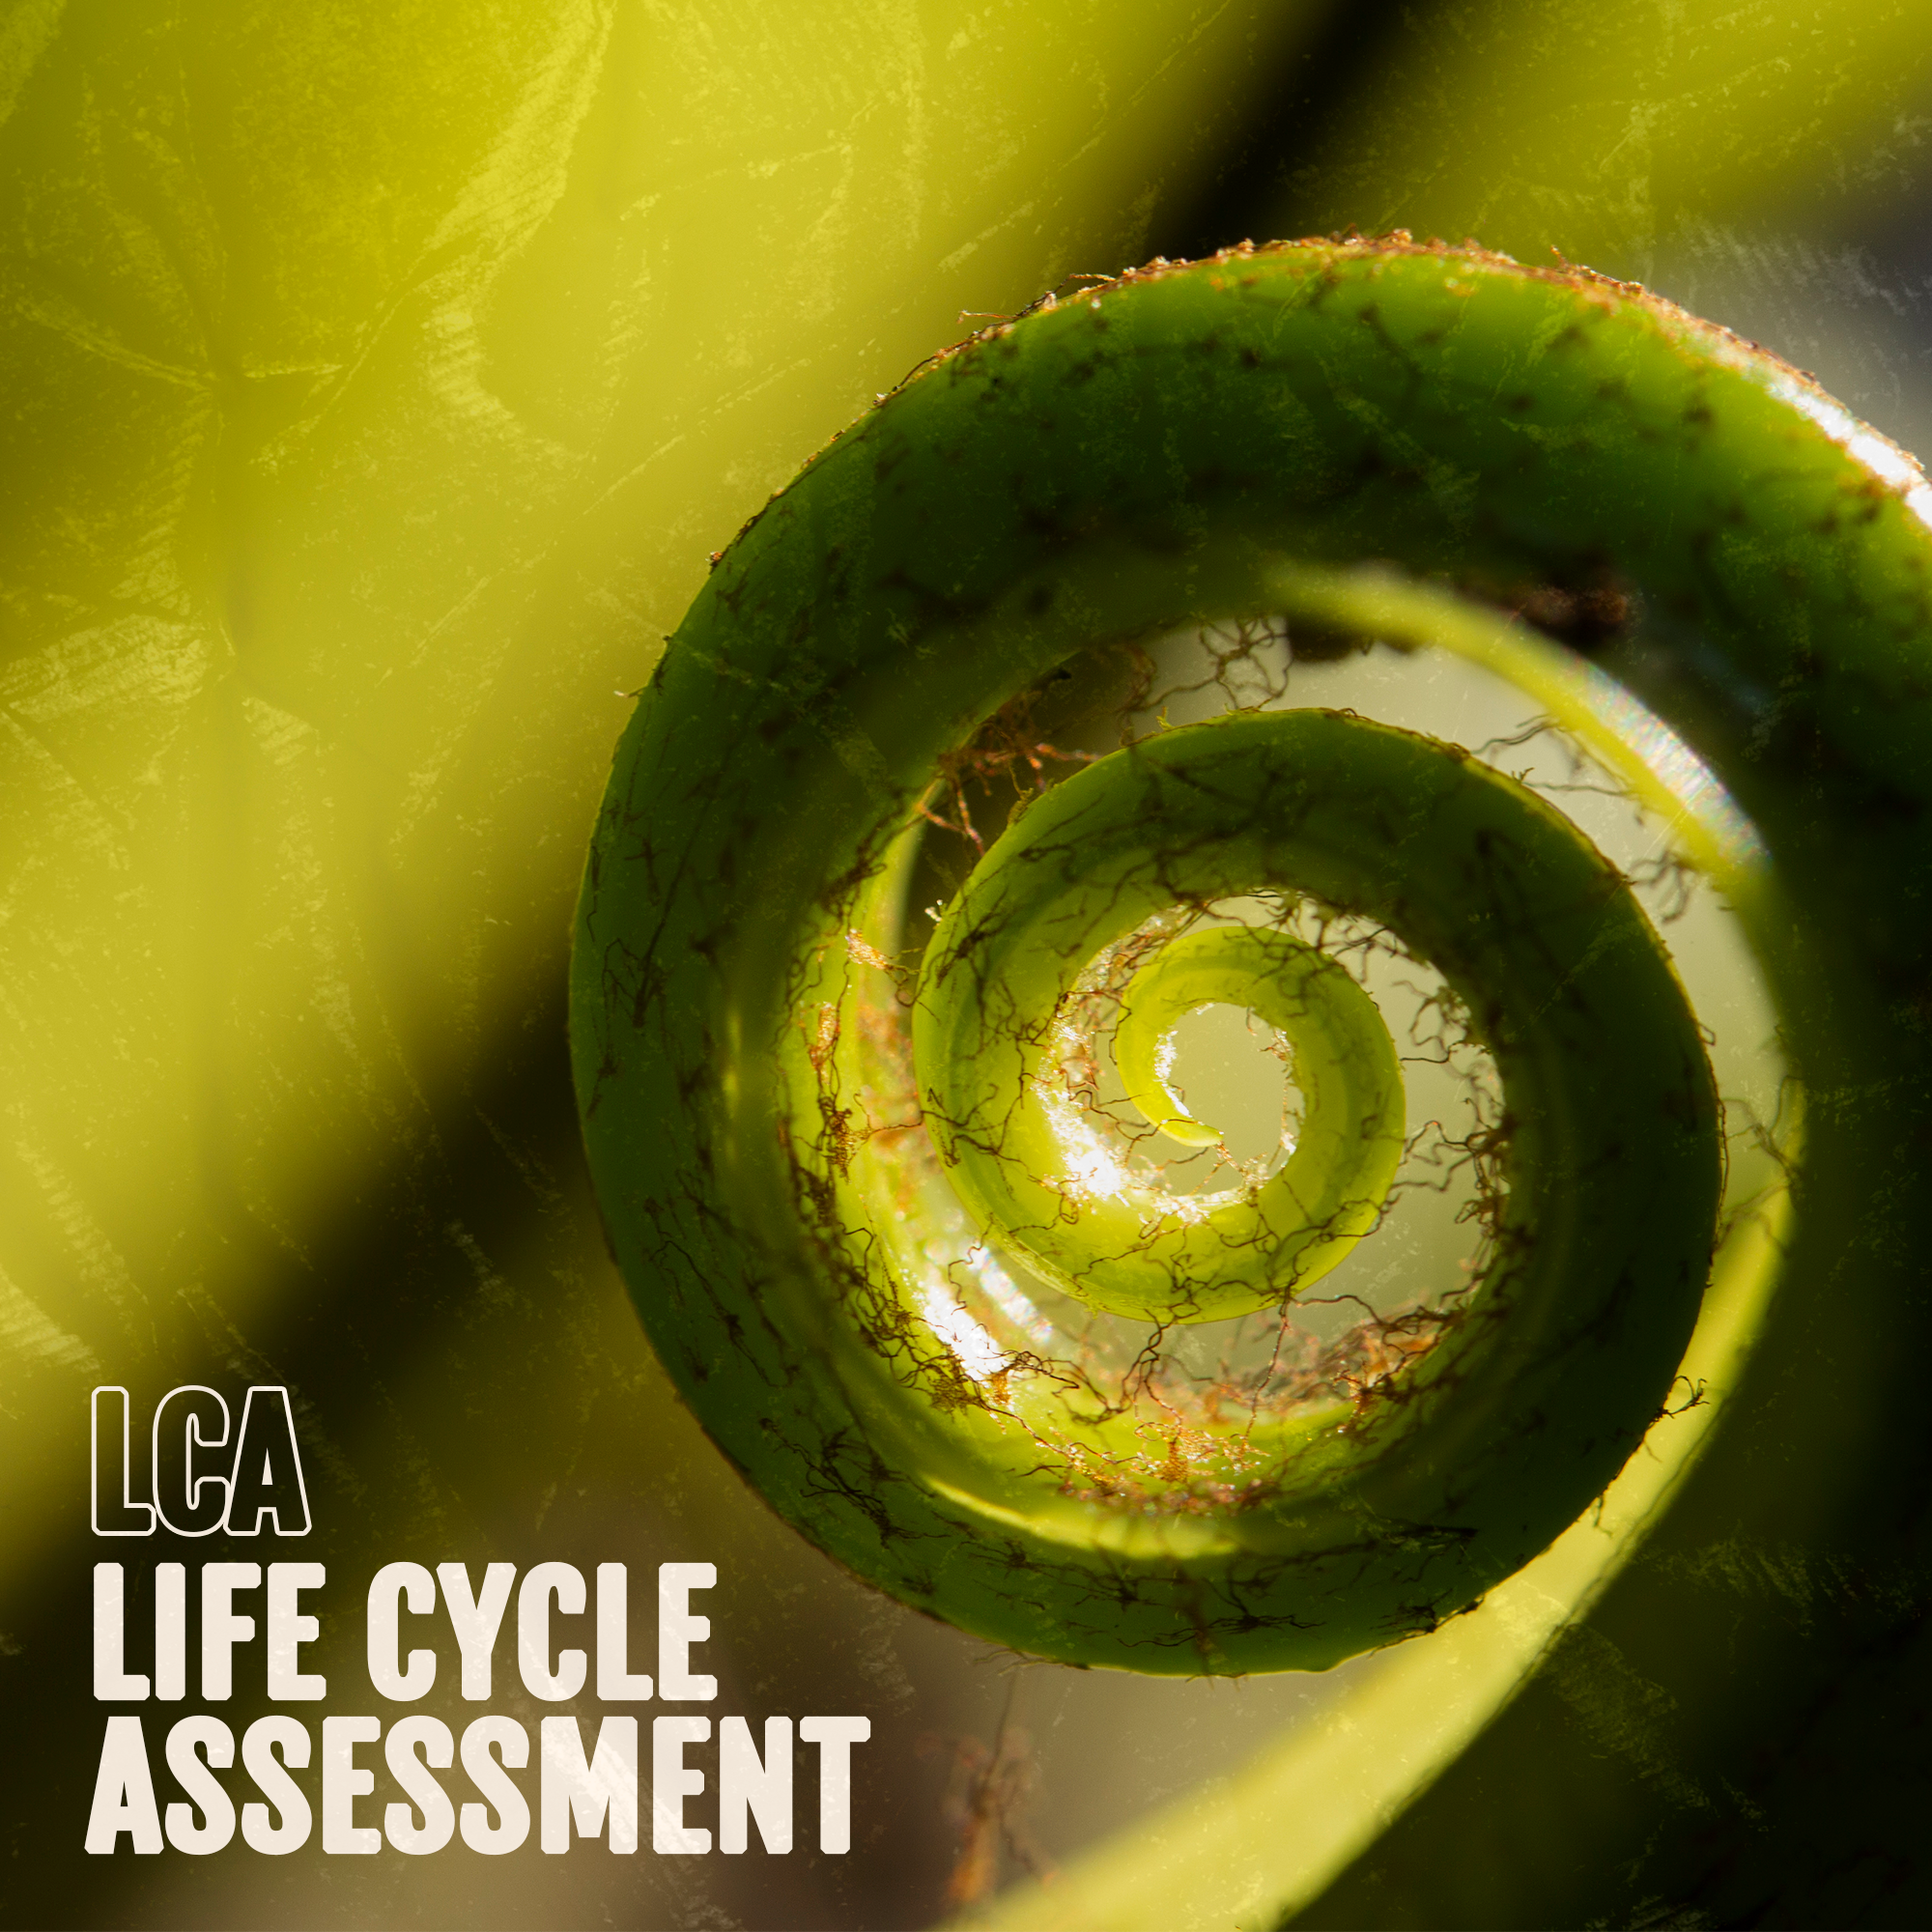 LIFE CYCLE ASSESSMENT (LCA)